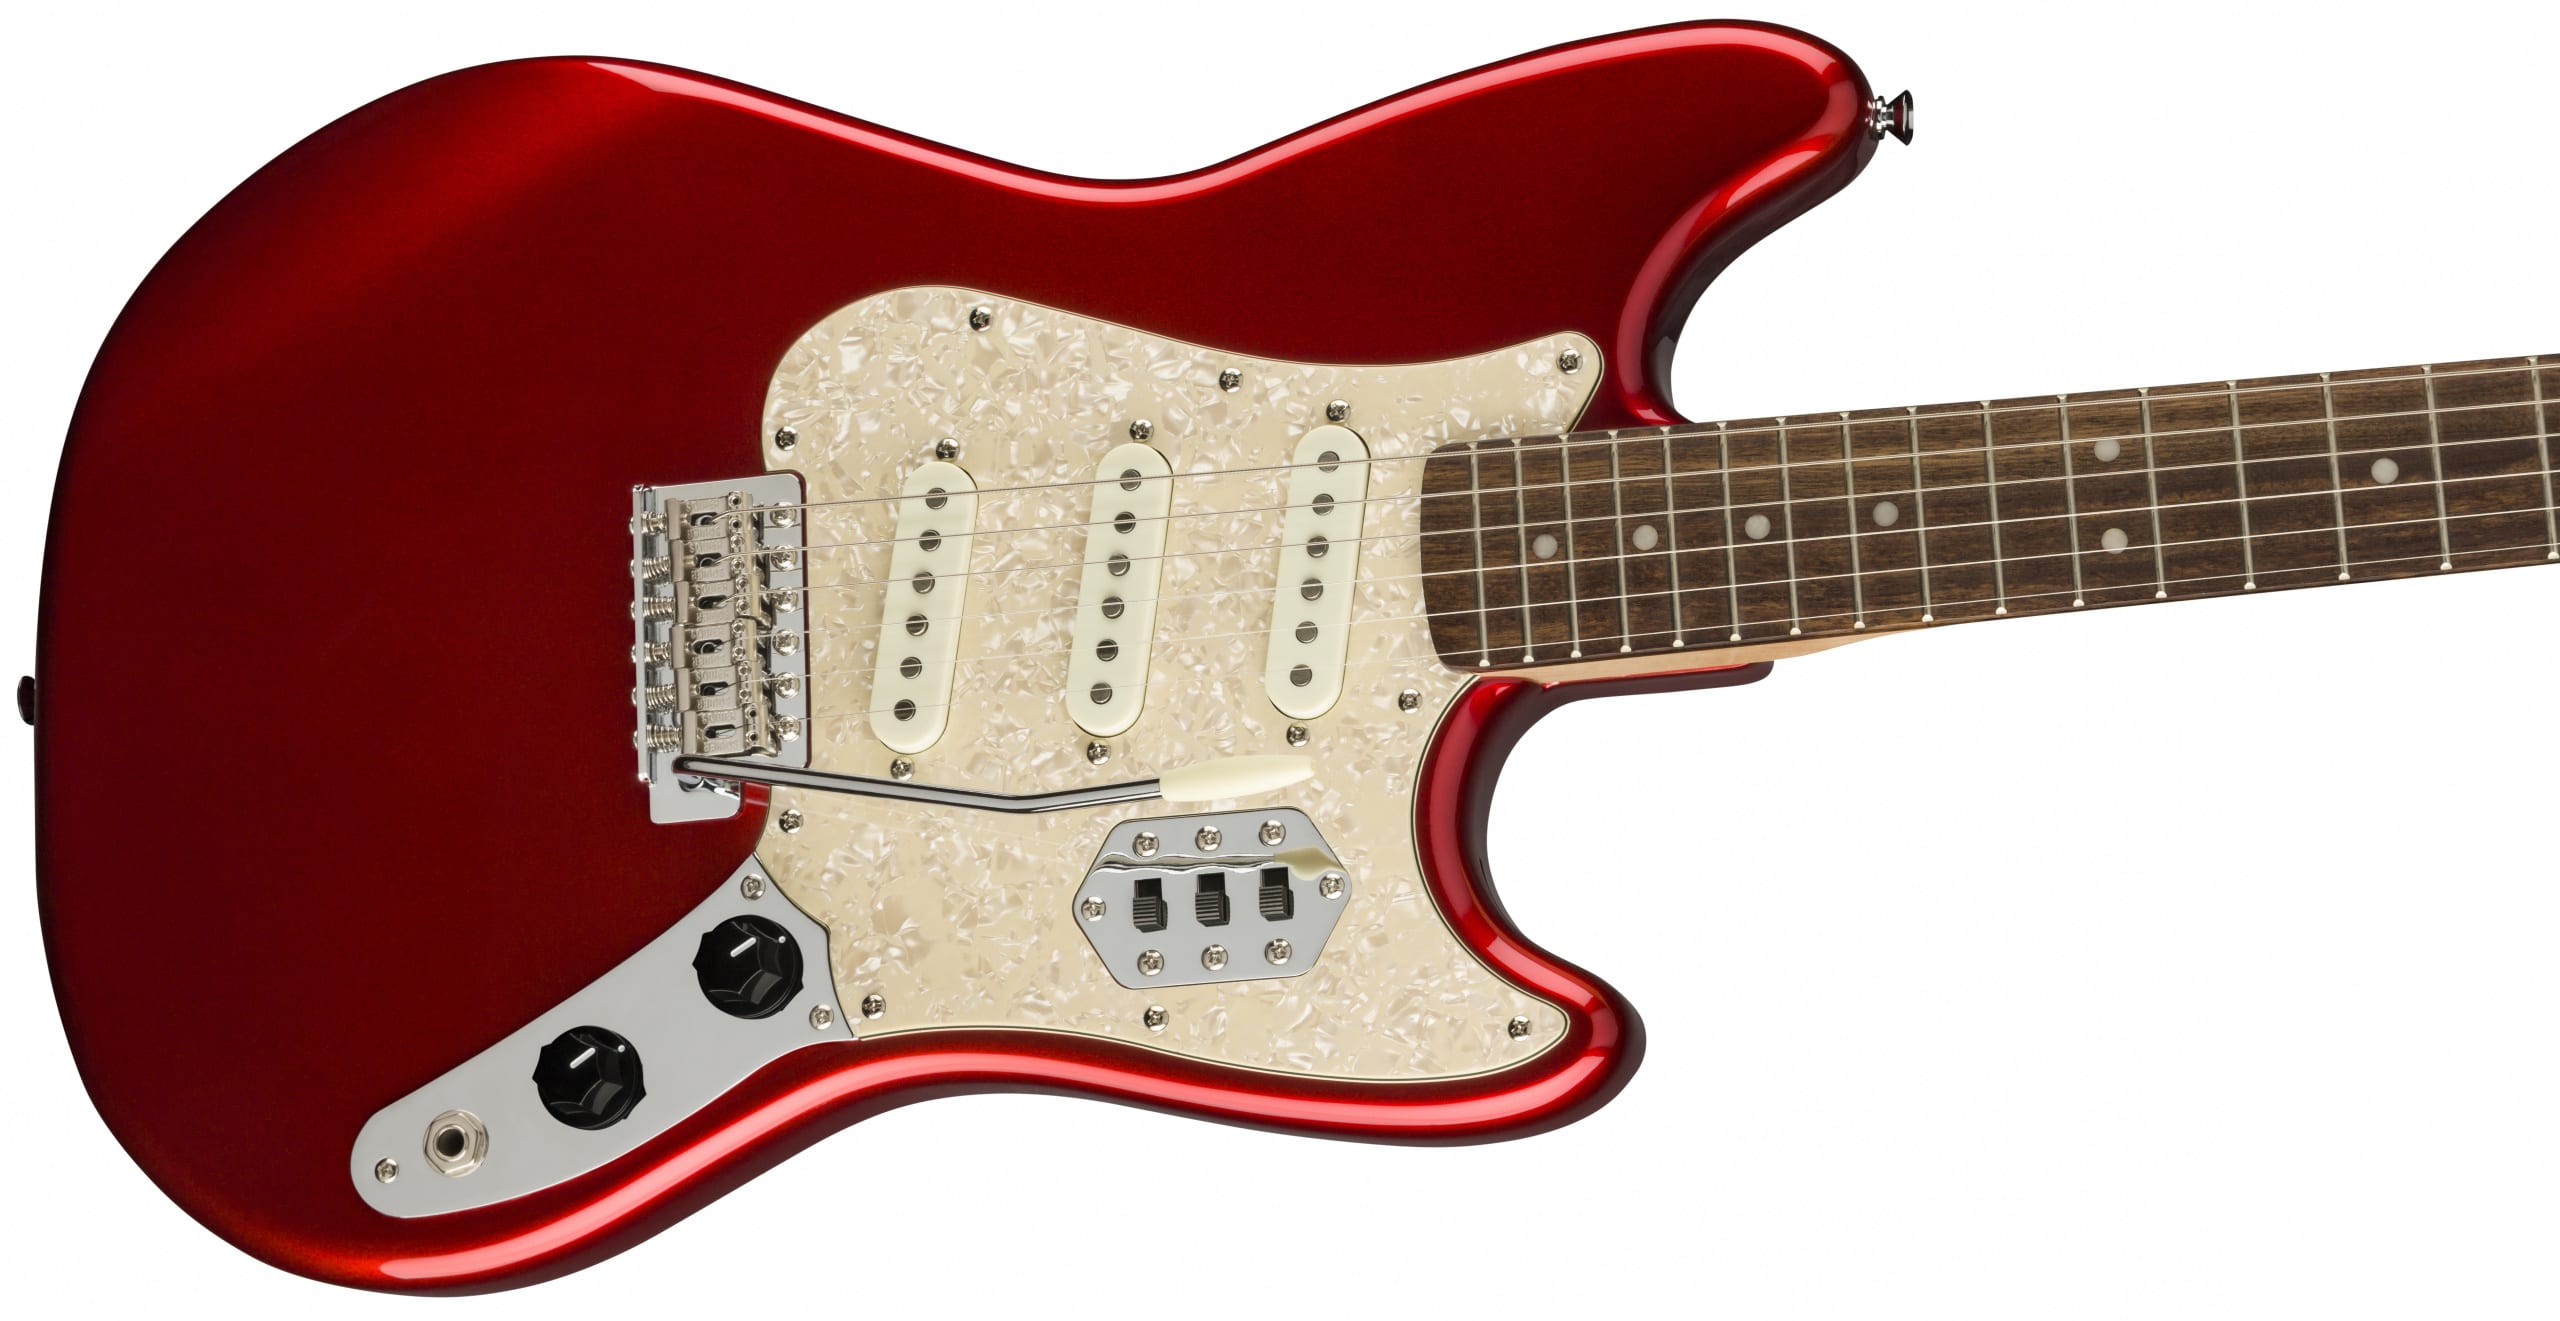 Squier Paranormal Range Cyclone in Candy Apple Red scaled